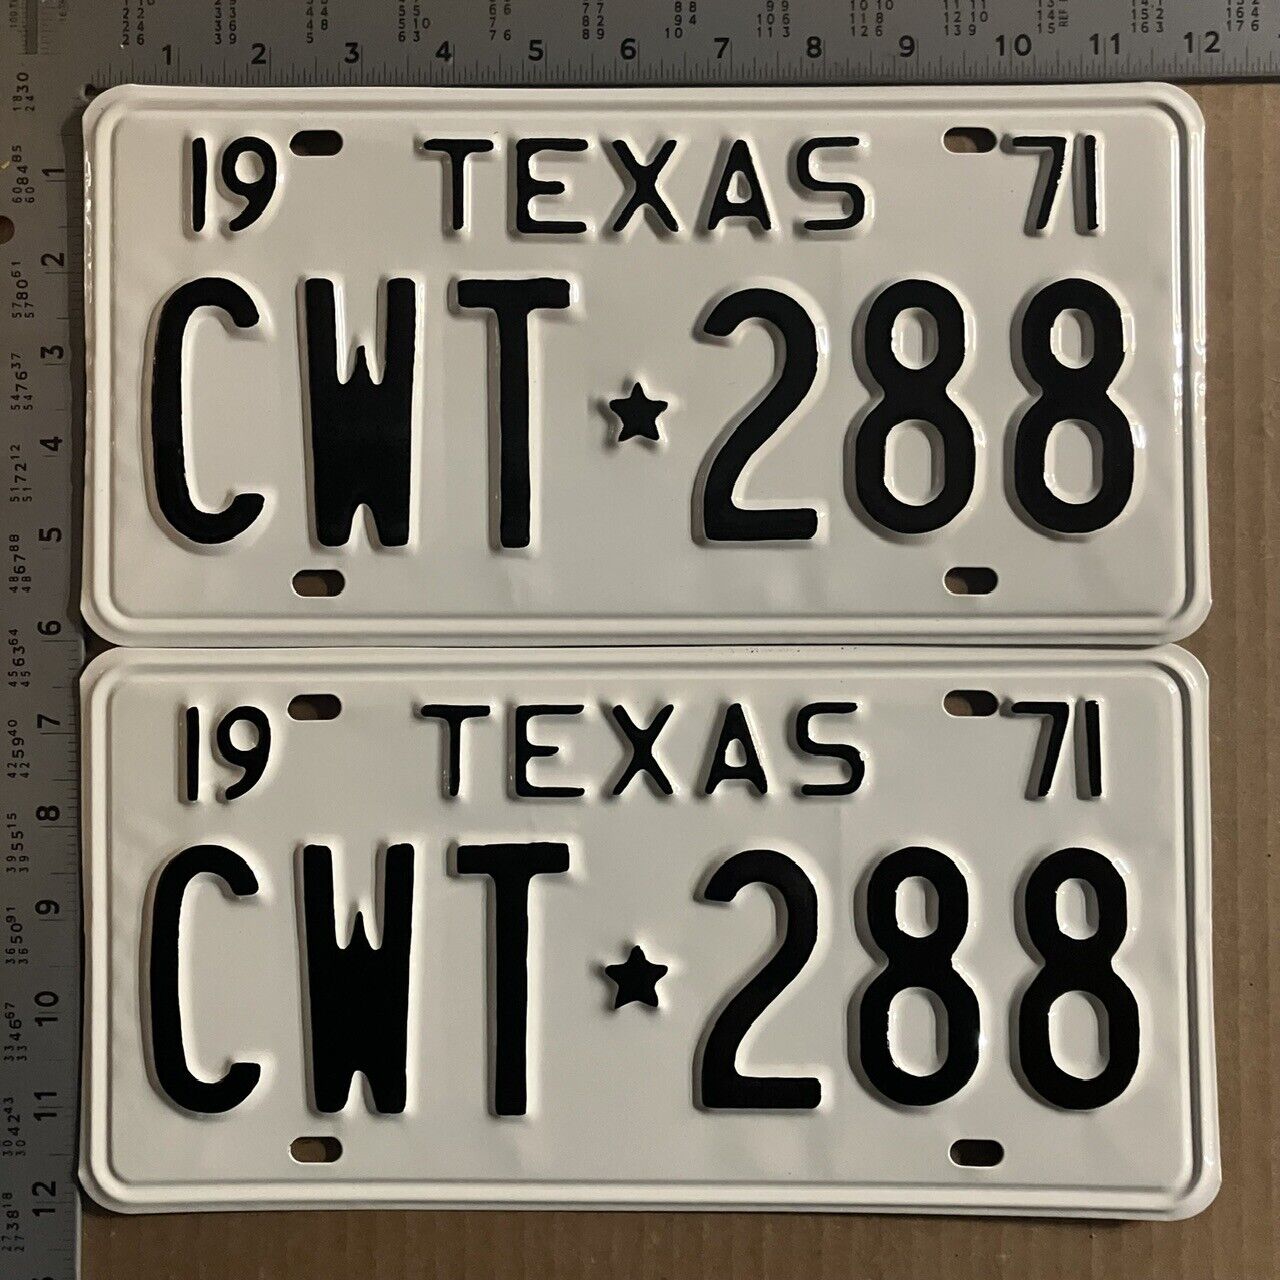 1971 Texas license plate pair CWT 2 88 YOM DMV for your OLDSMOBILE 13029